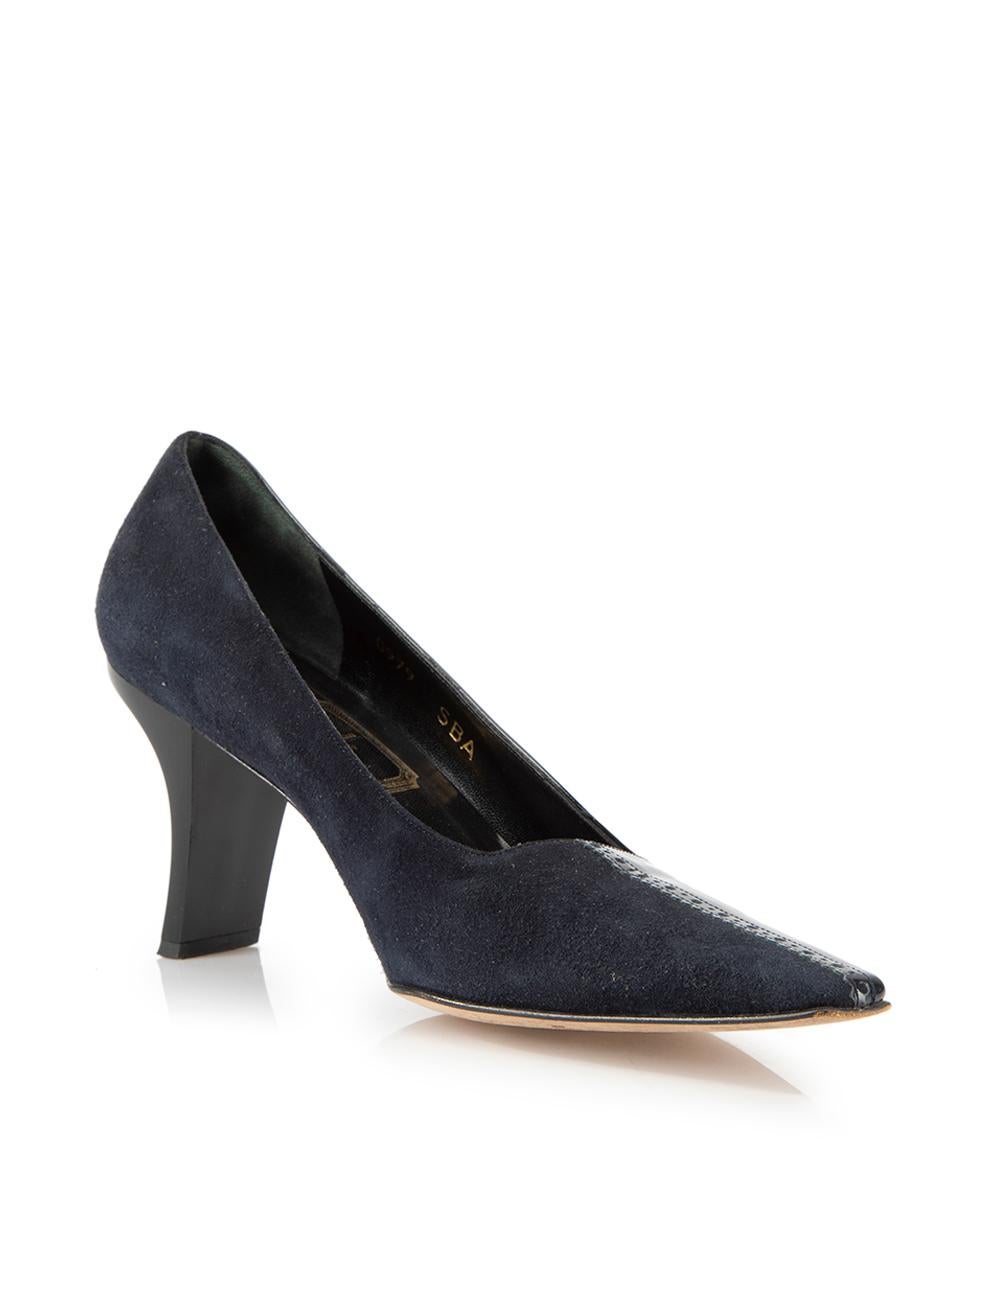 CONDITION is Very good. Minimal wear to pumps is evident. Minimal wear to the exterior leather and suede on this used Dior designer resale item. 
 
 Details
  Navy and black
 Suede and patent leather
 Slip on pumps
 Pointed toe
 High heel
 Contrast